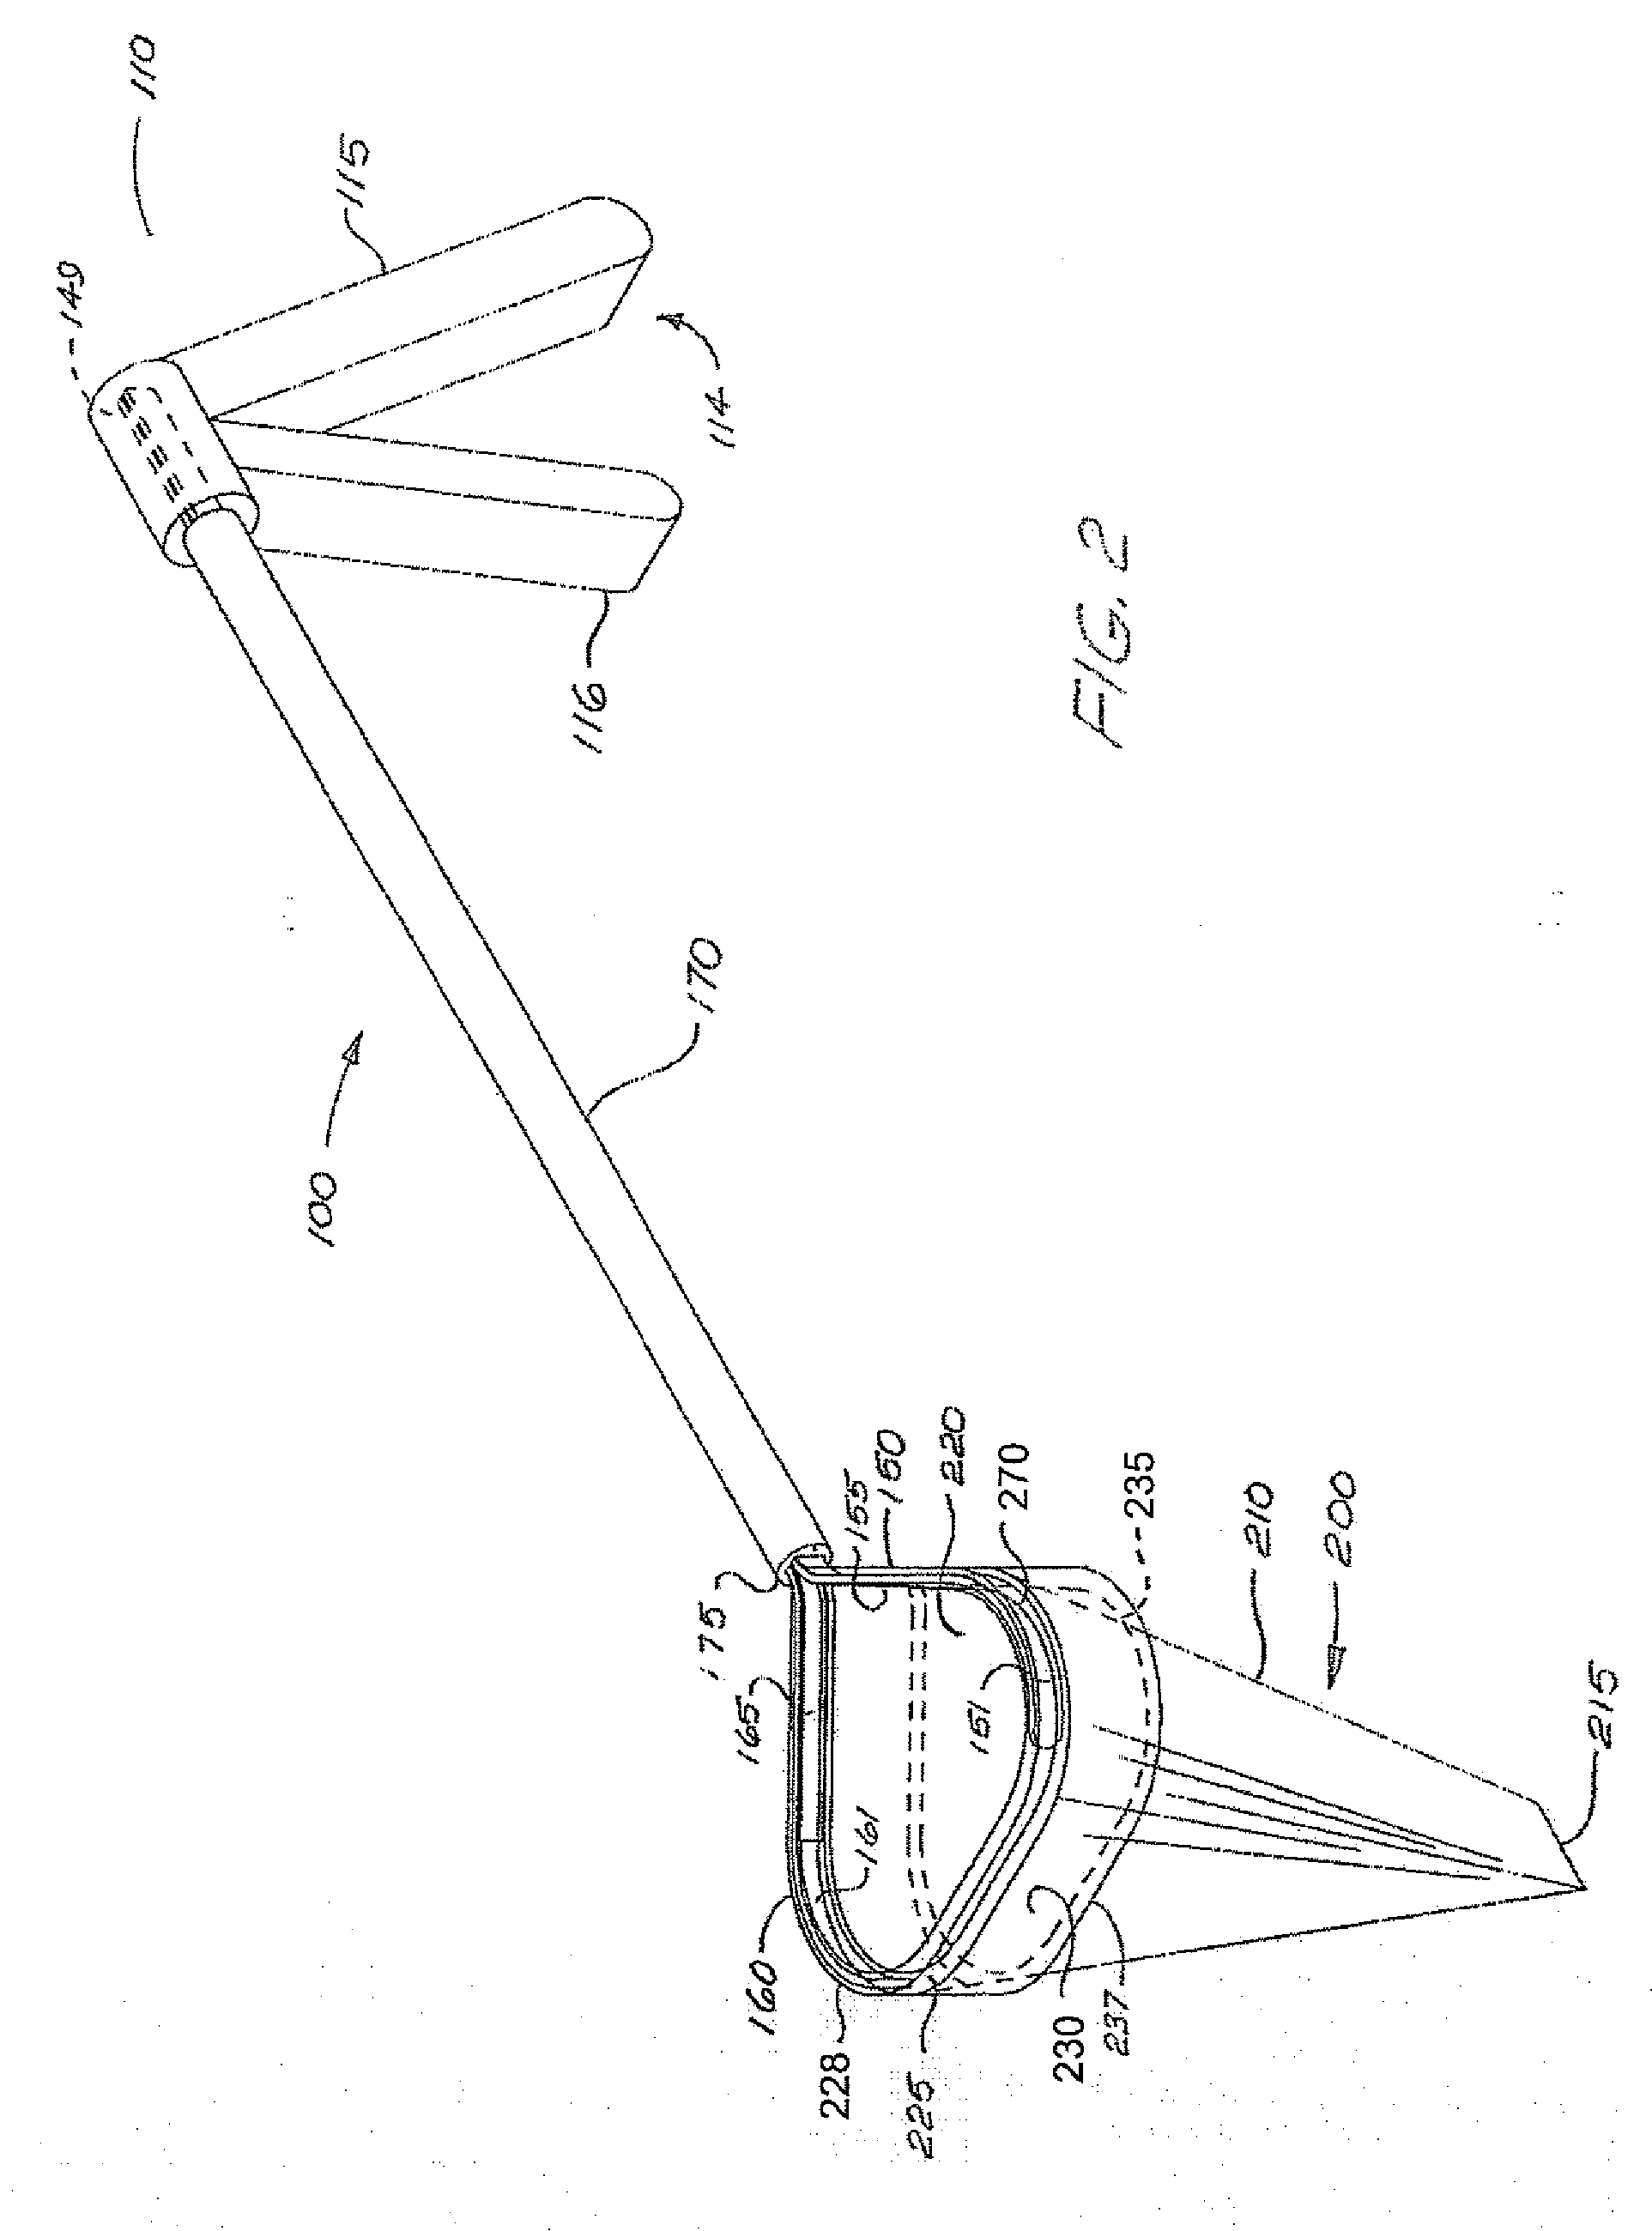 Device for isolating and removing tissue from a body cavity